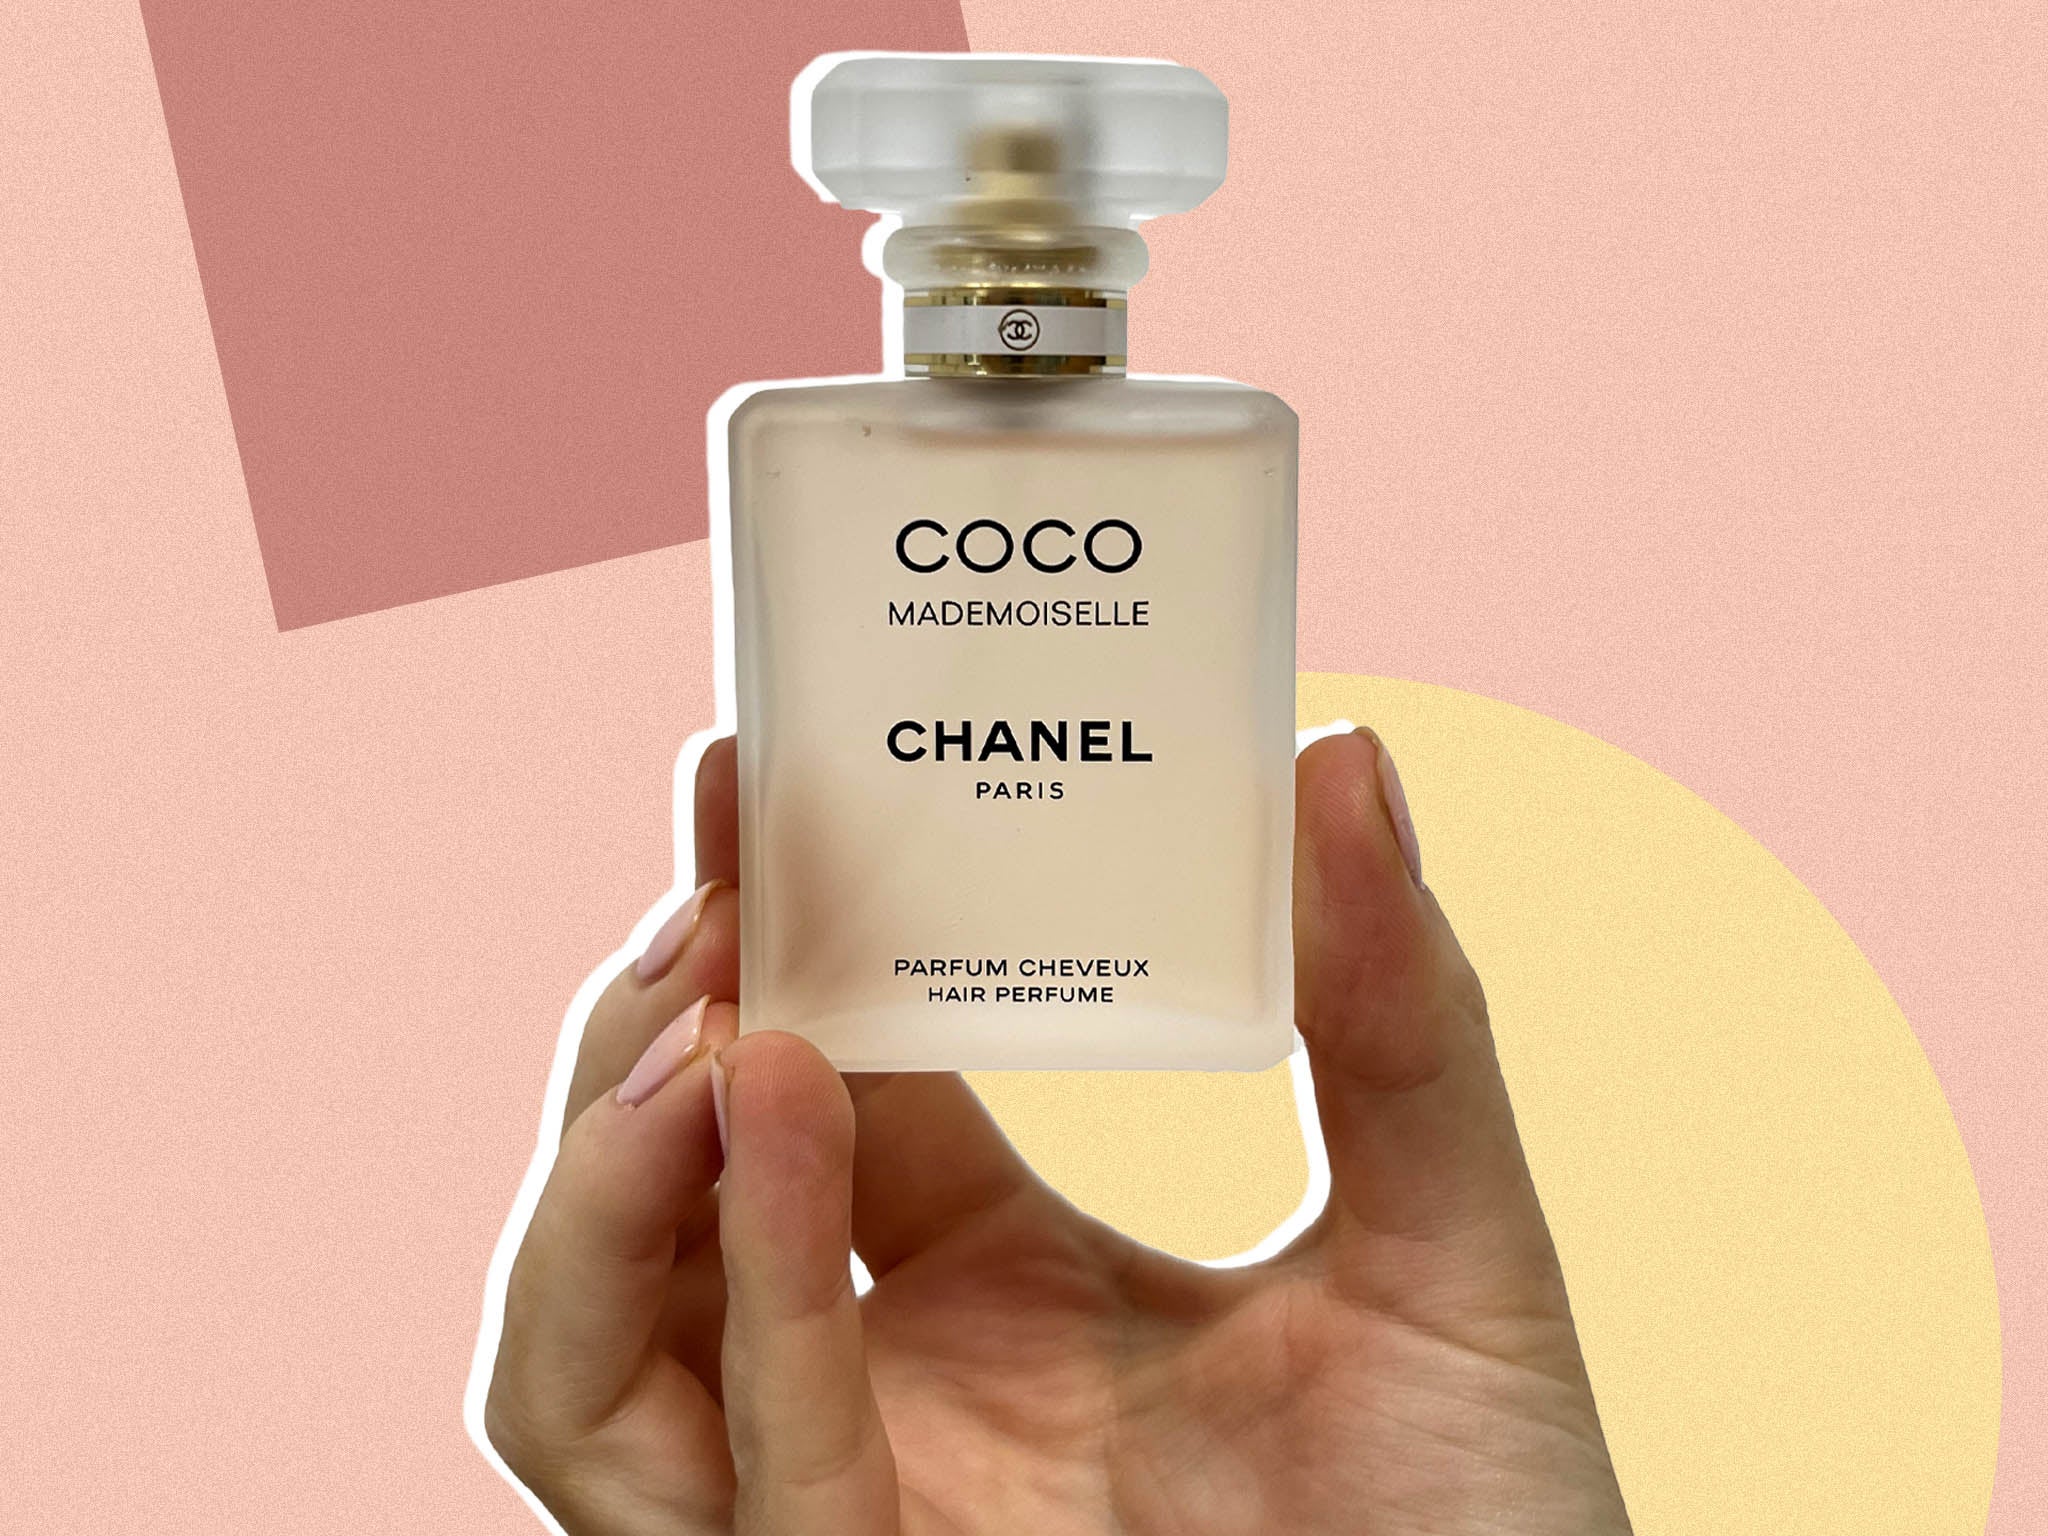 Chanel's new coco mademoiselle creation is here, and this is what we  thought of the hair perfume | The Independent